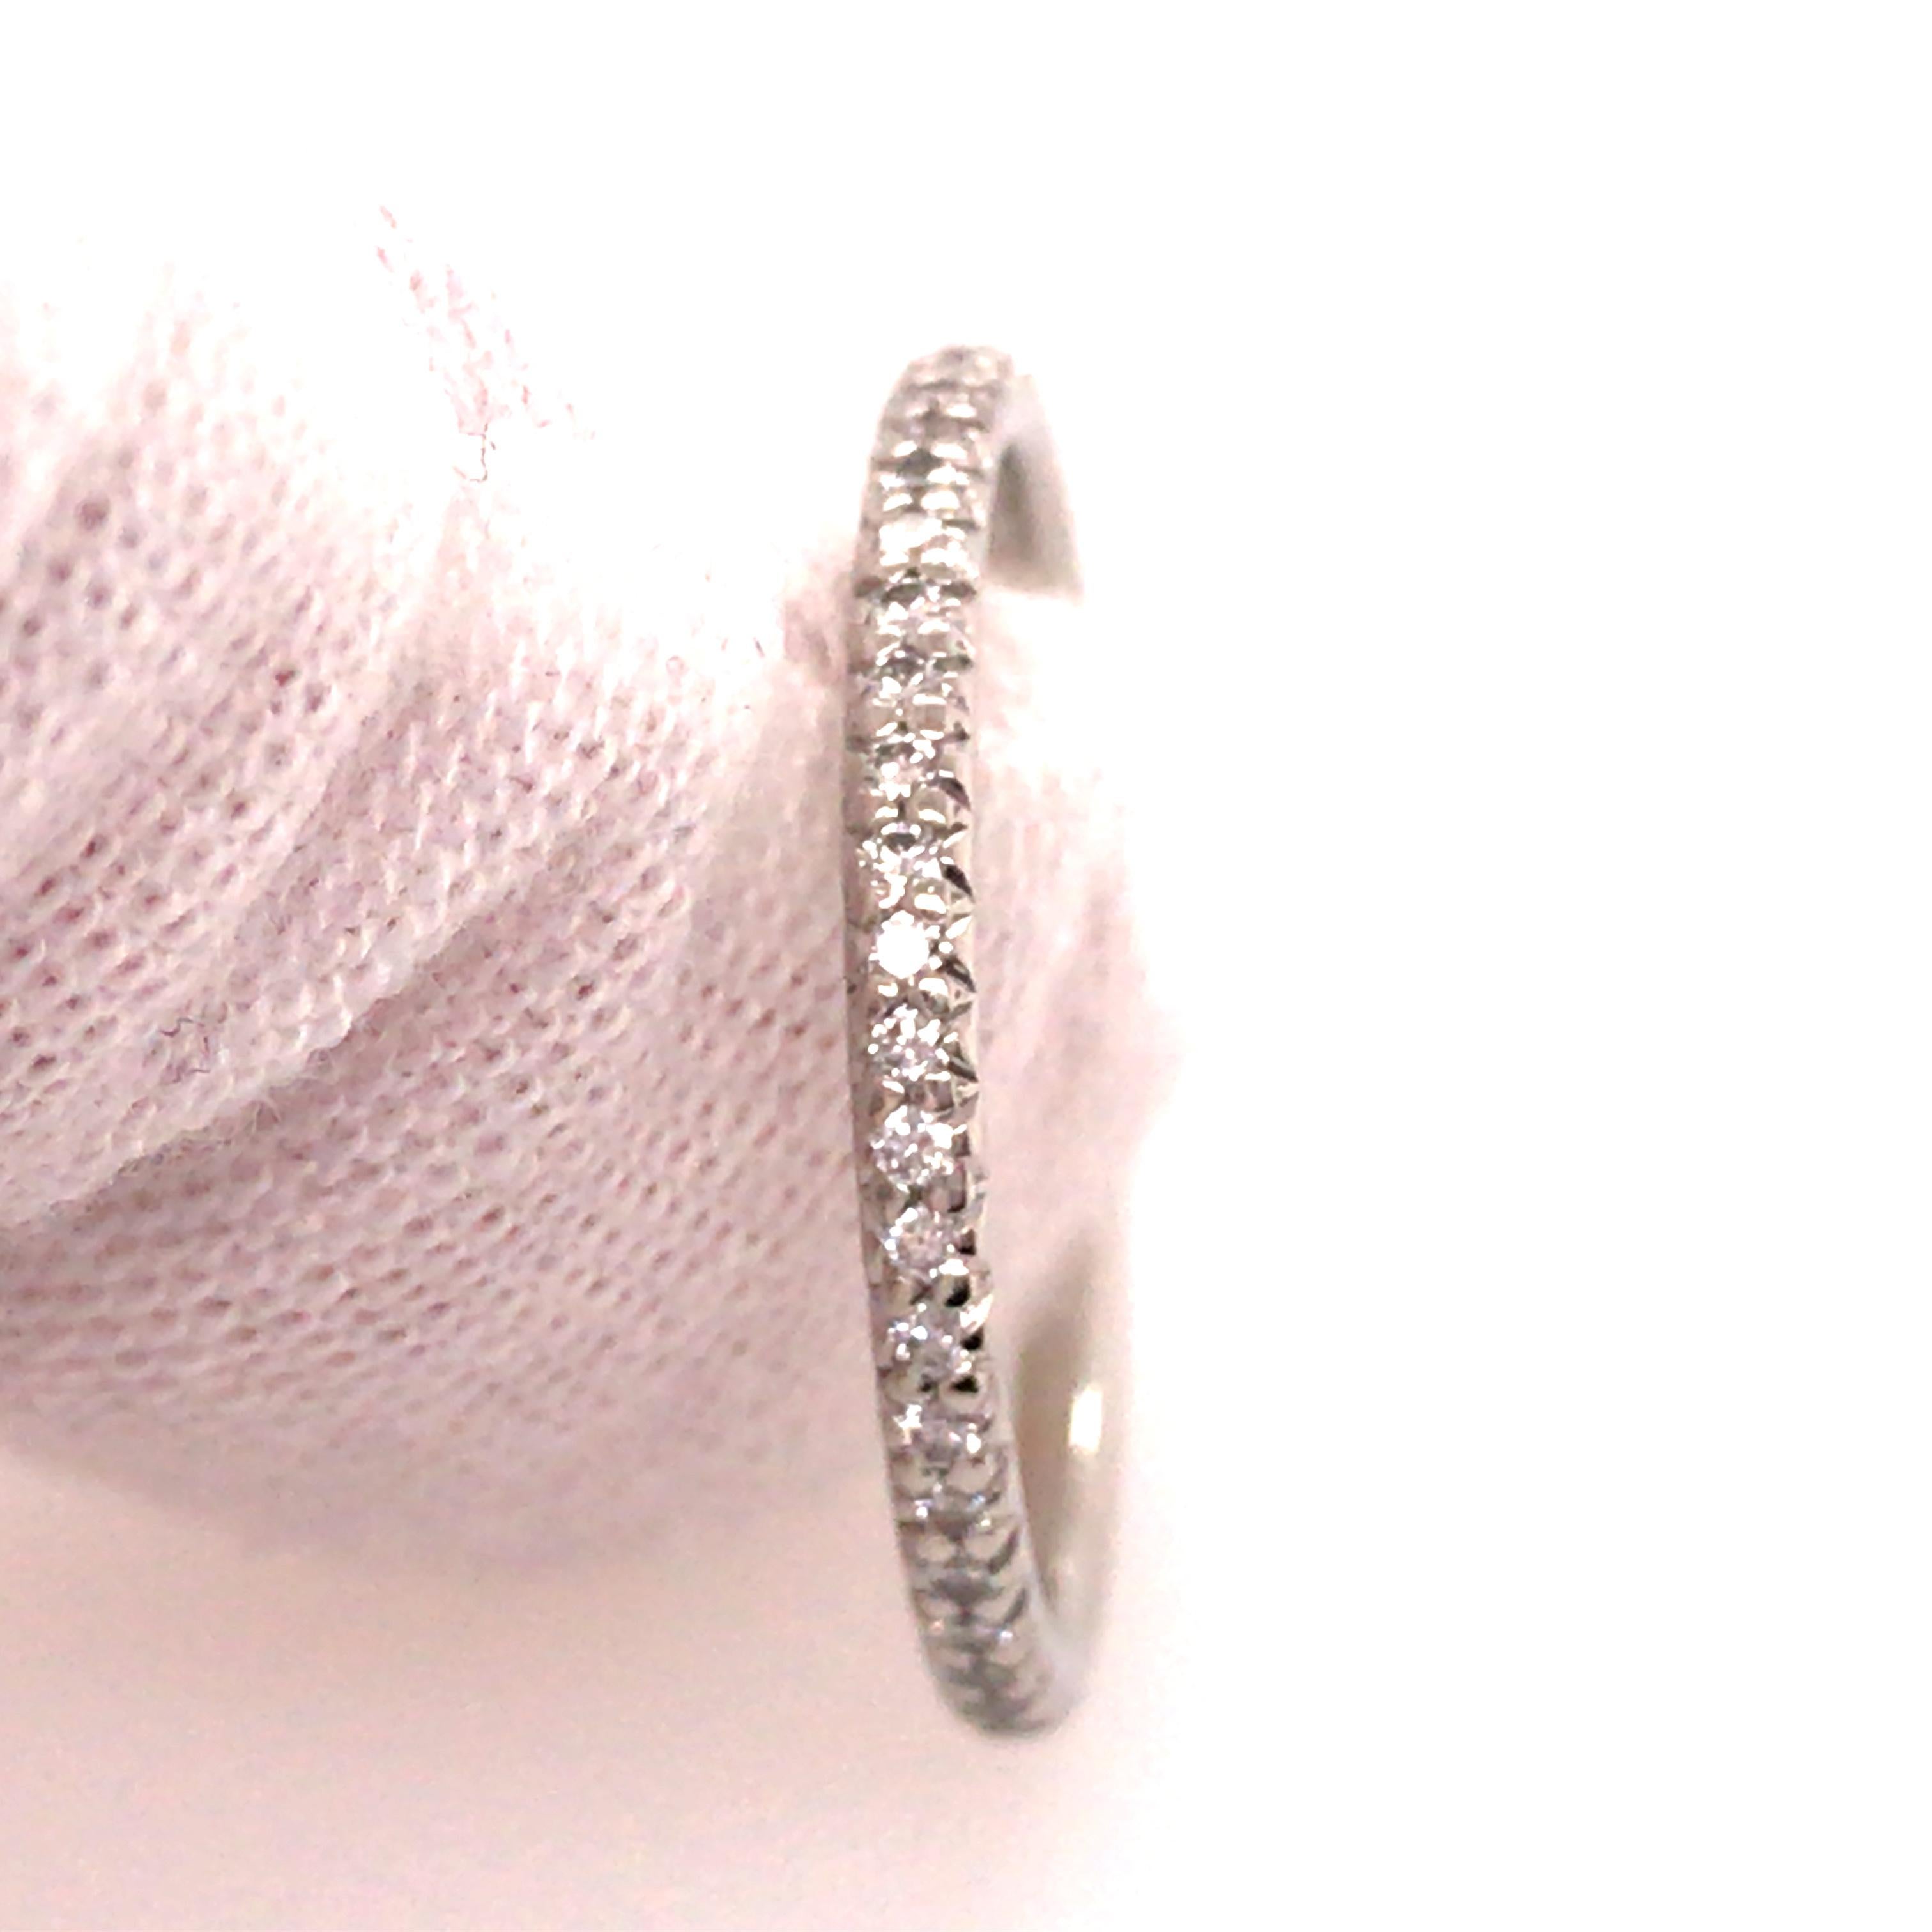 Platinum Diamond Eternity Band.  Expertly Prong set with Round Brilliant Cut Diamonds weighing .39 carat total weight G-H in color and VS in clarity.  The Ring measures 1/8 inch in width and weighs 2.79 grams. Ring size 7 1/2.